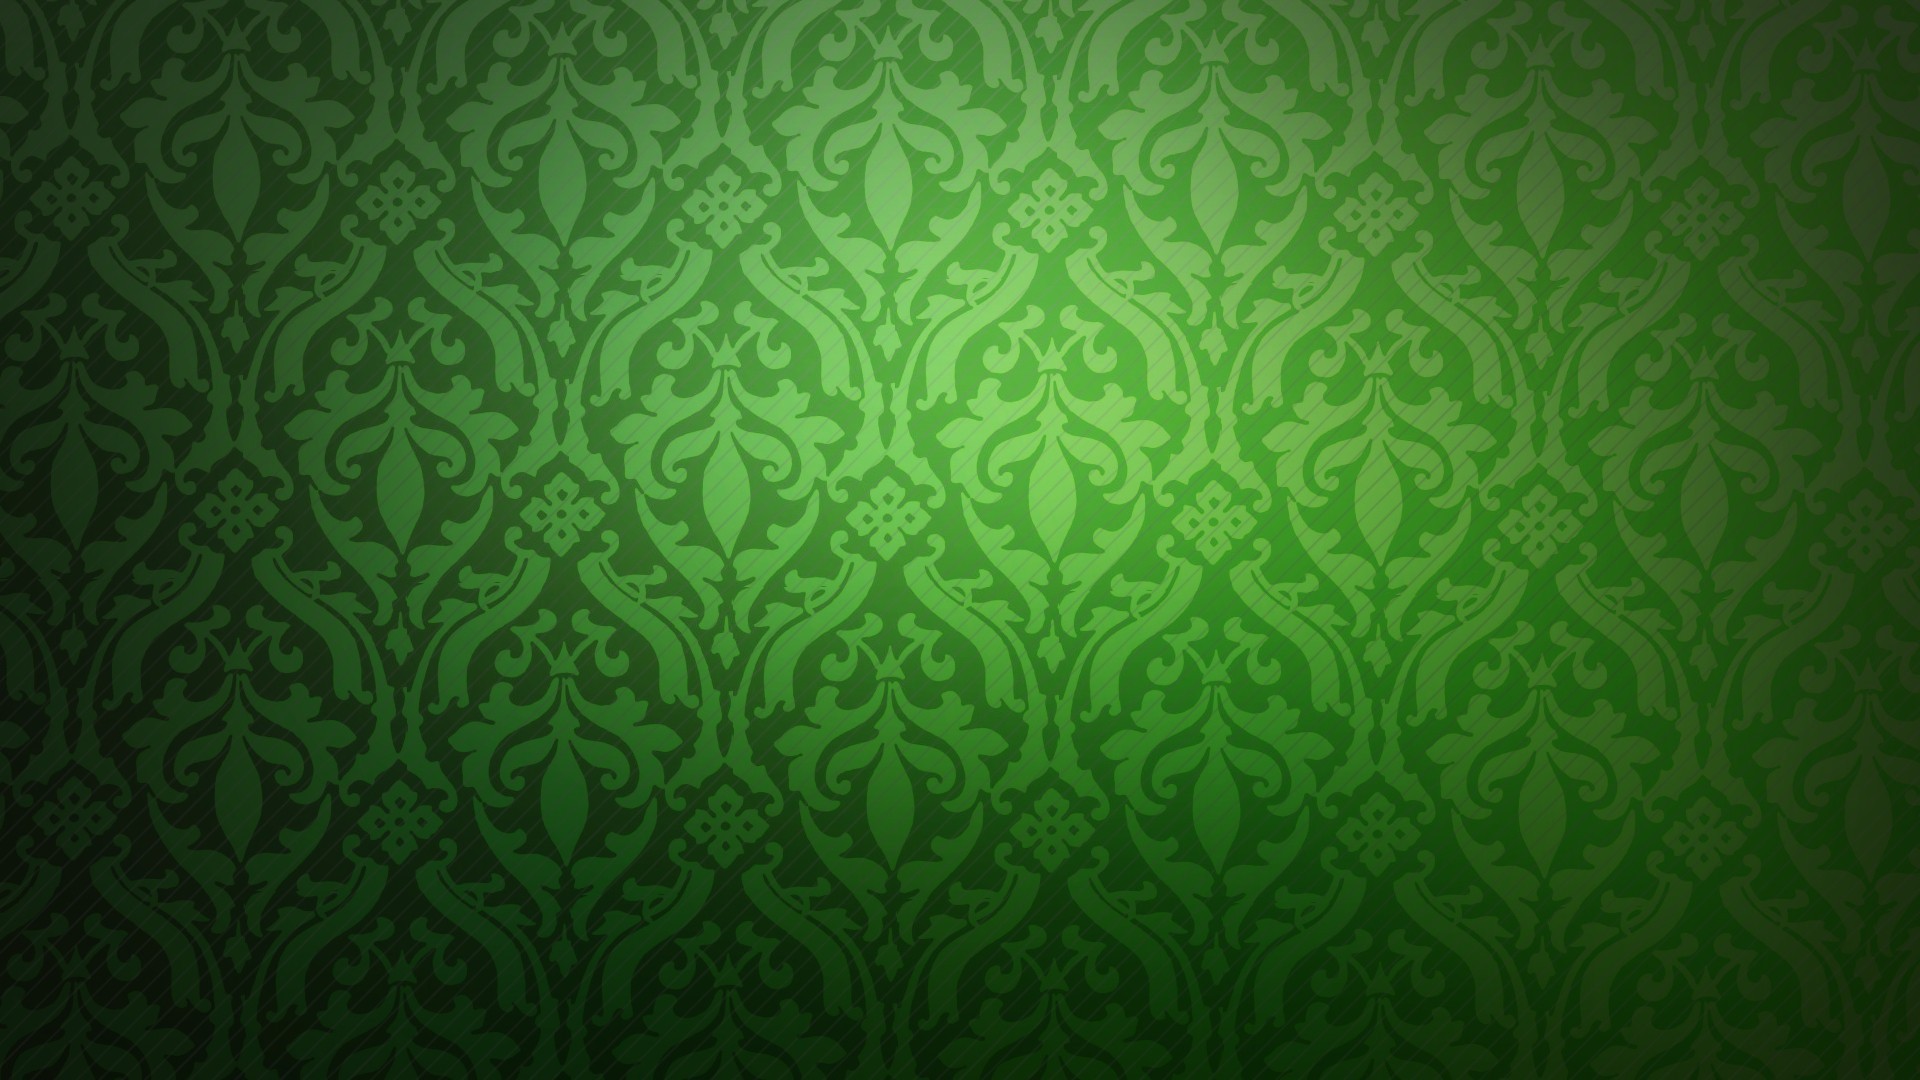 Desktop Wallpaper Dark Green with resolution 1920X1080 pixel. You can use this wallpaper as background for your desktop Computer Screensavers, Android or iPhone smartphones